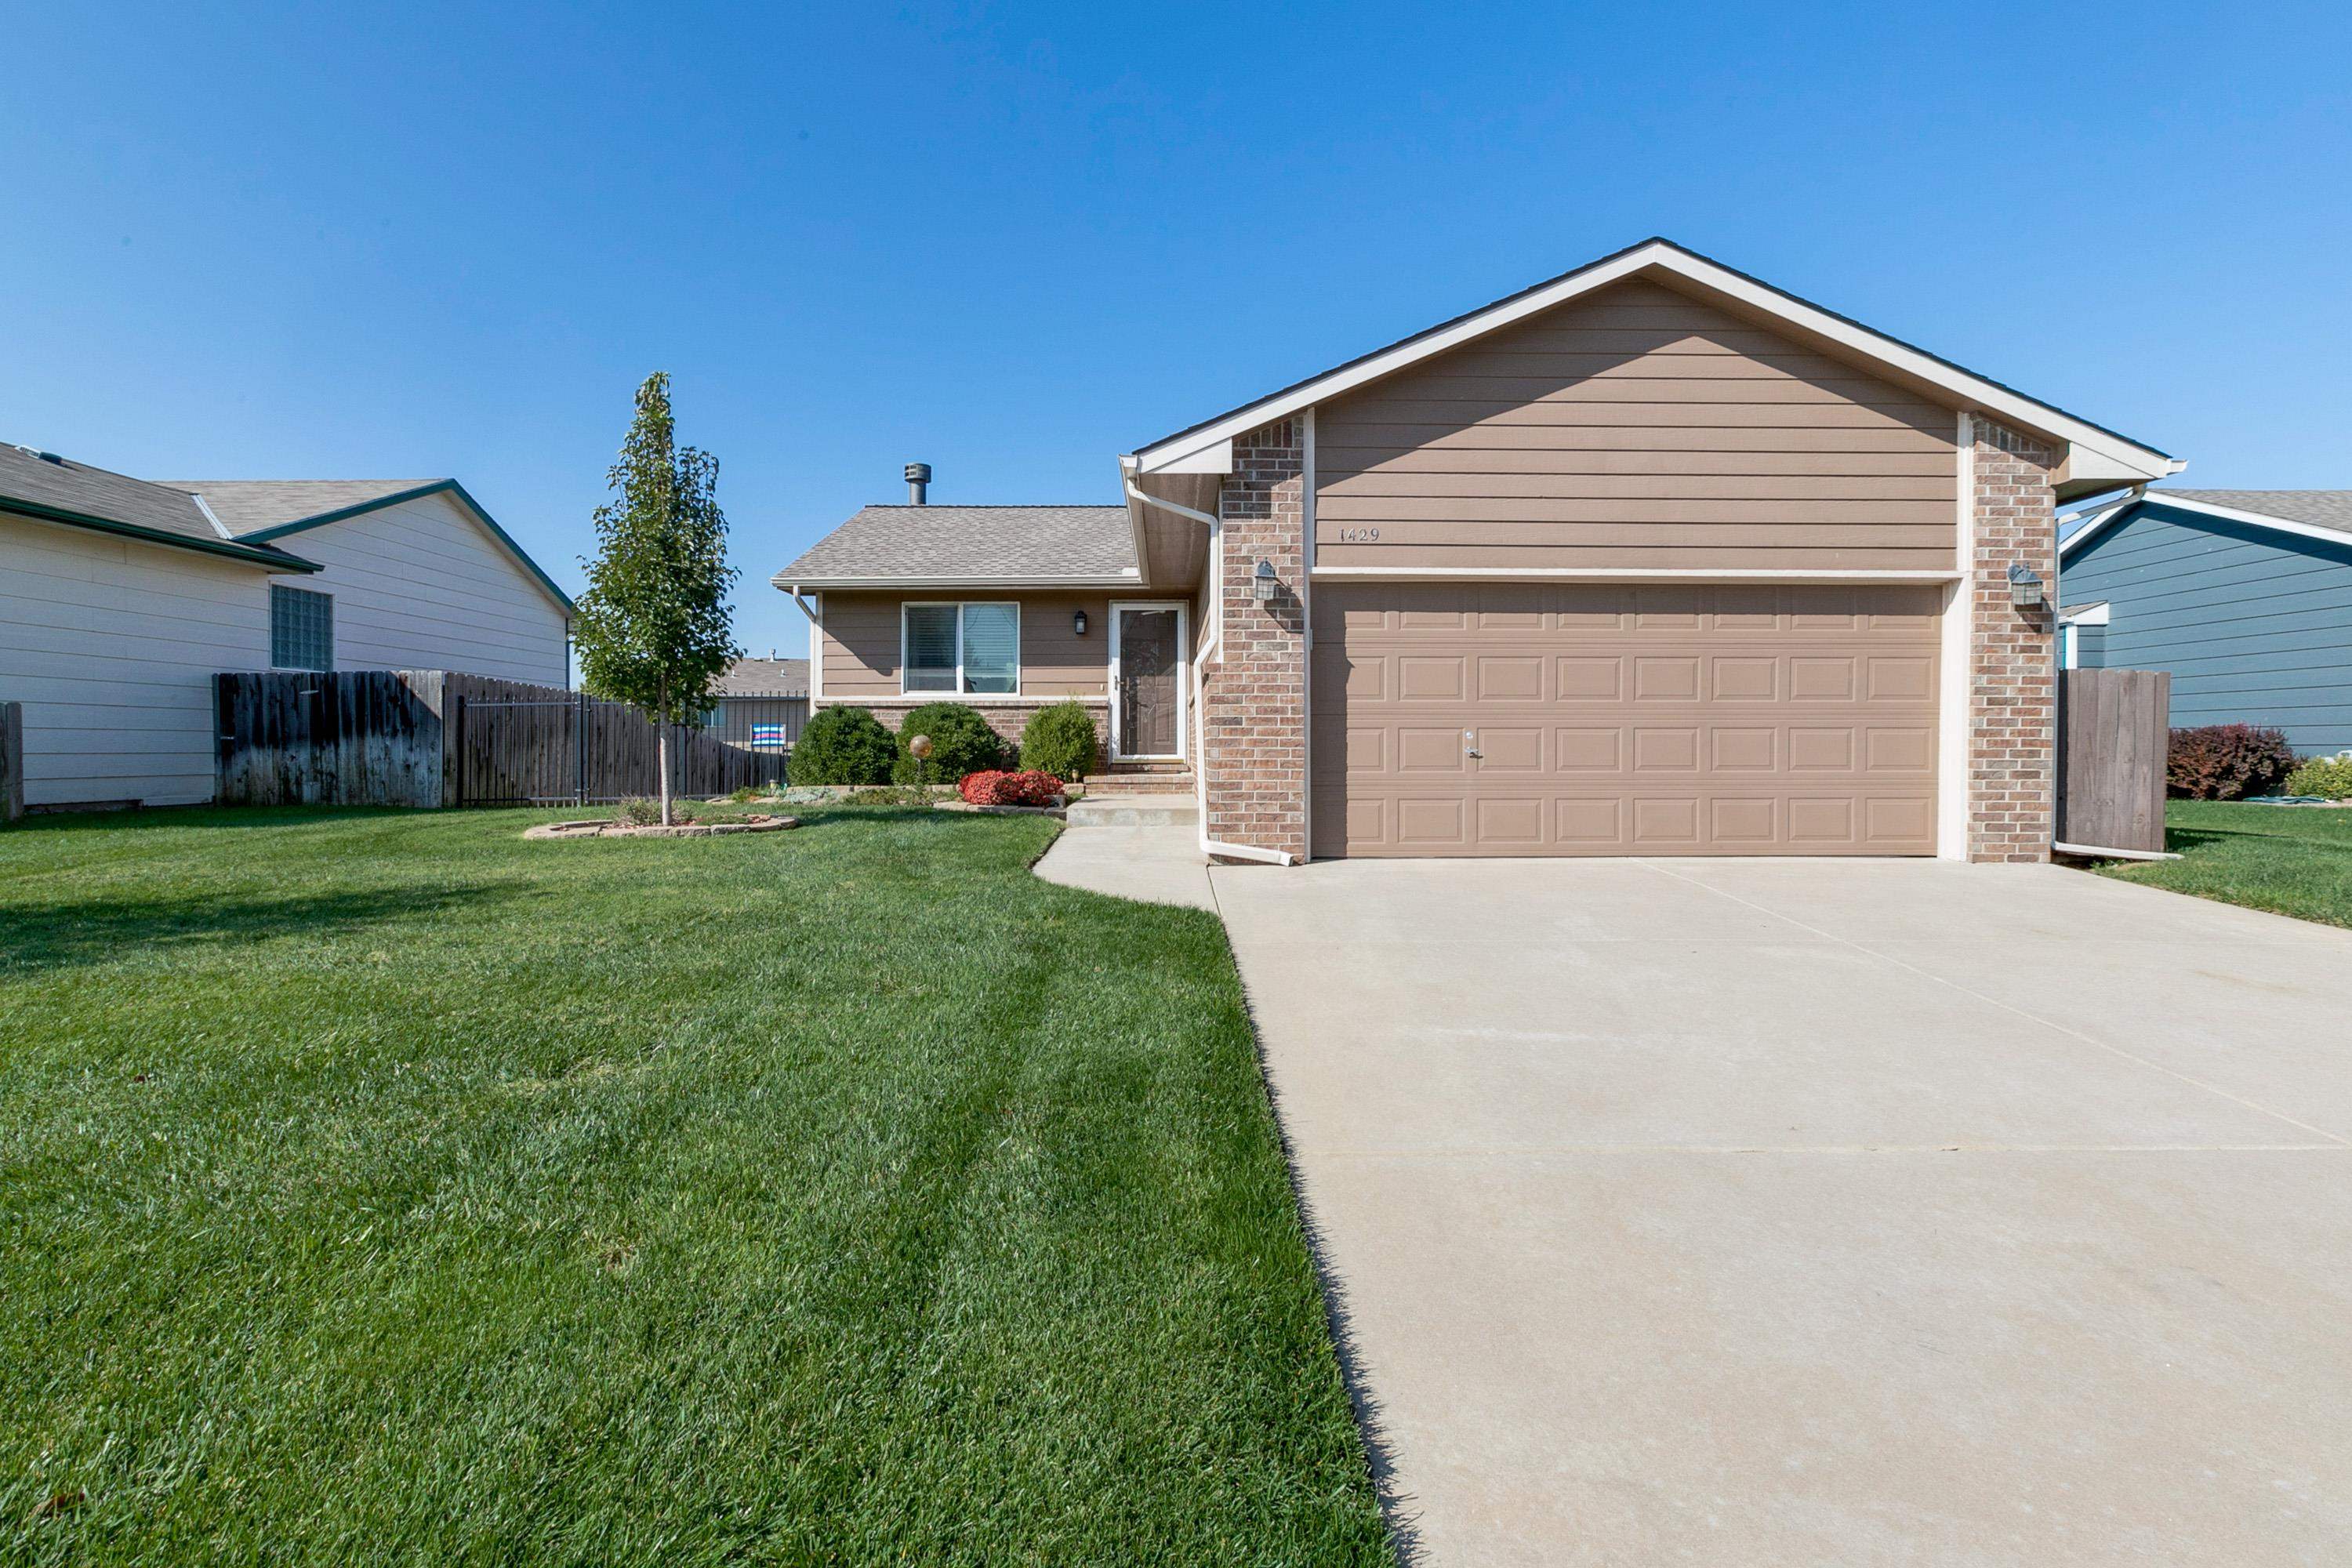 Check out this move in ready ranch in the perfect location! This is a hard-to-find updated home at a